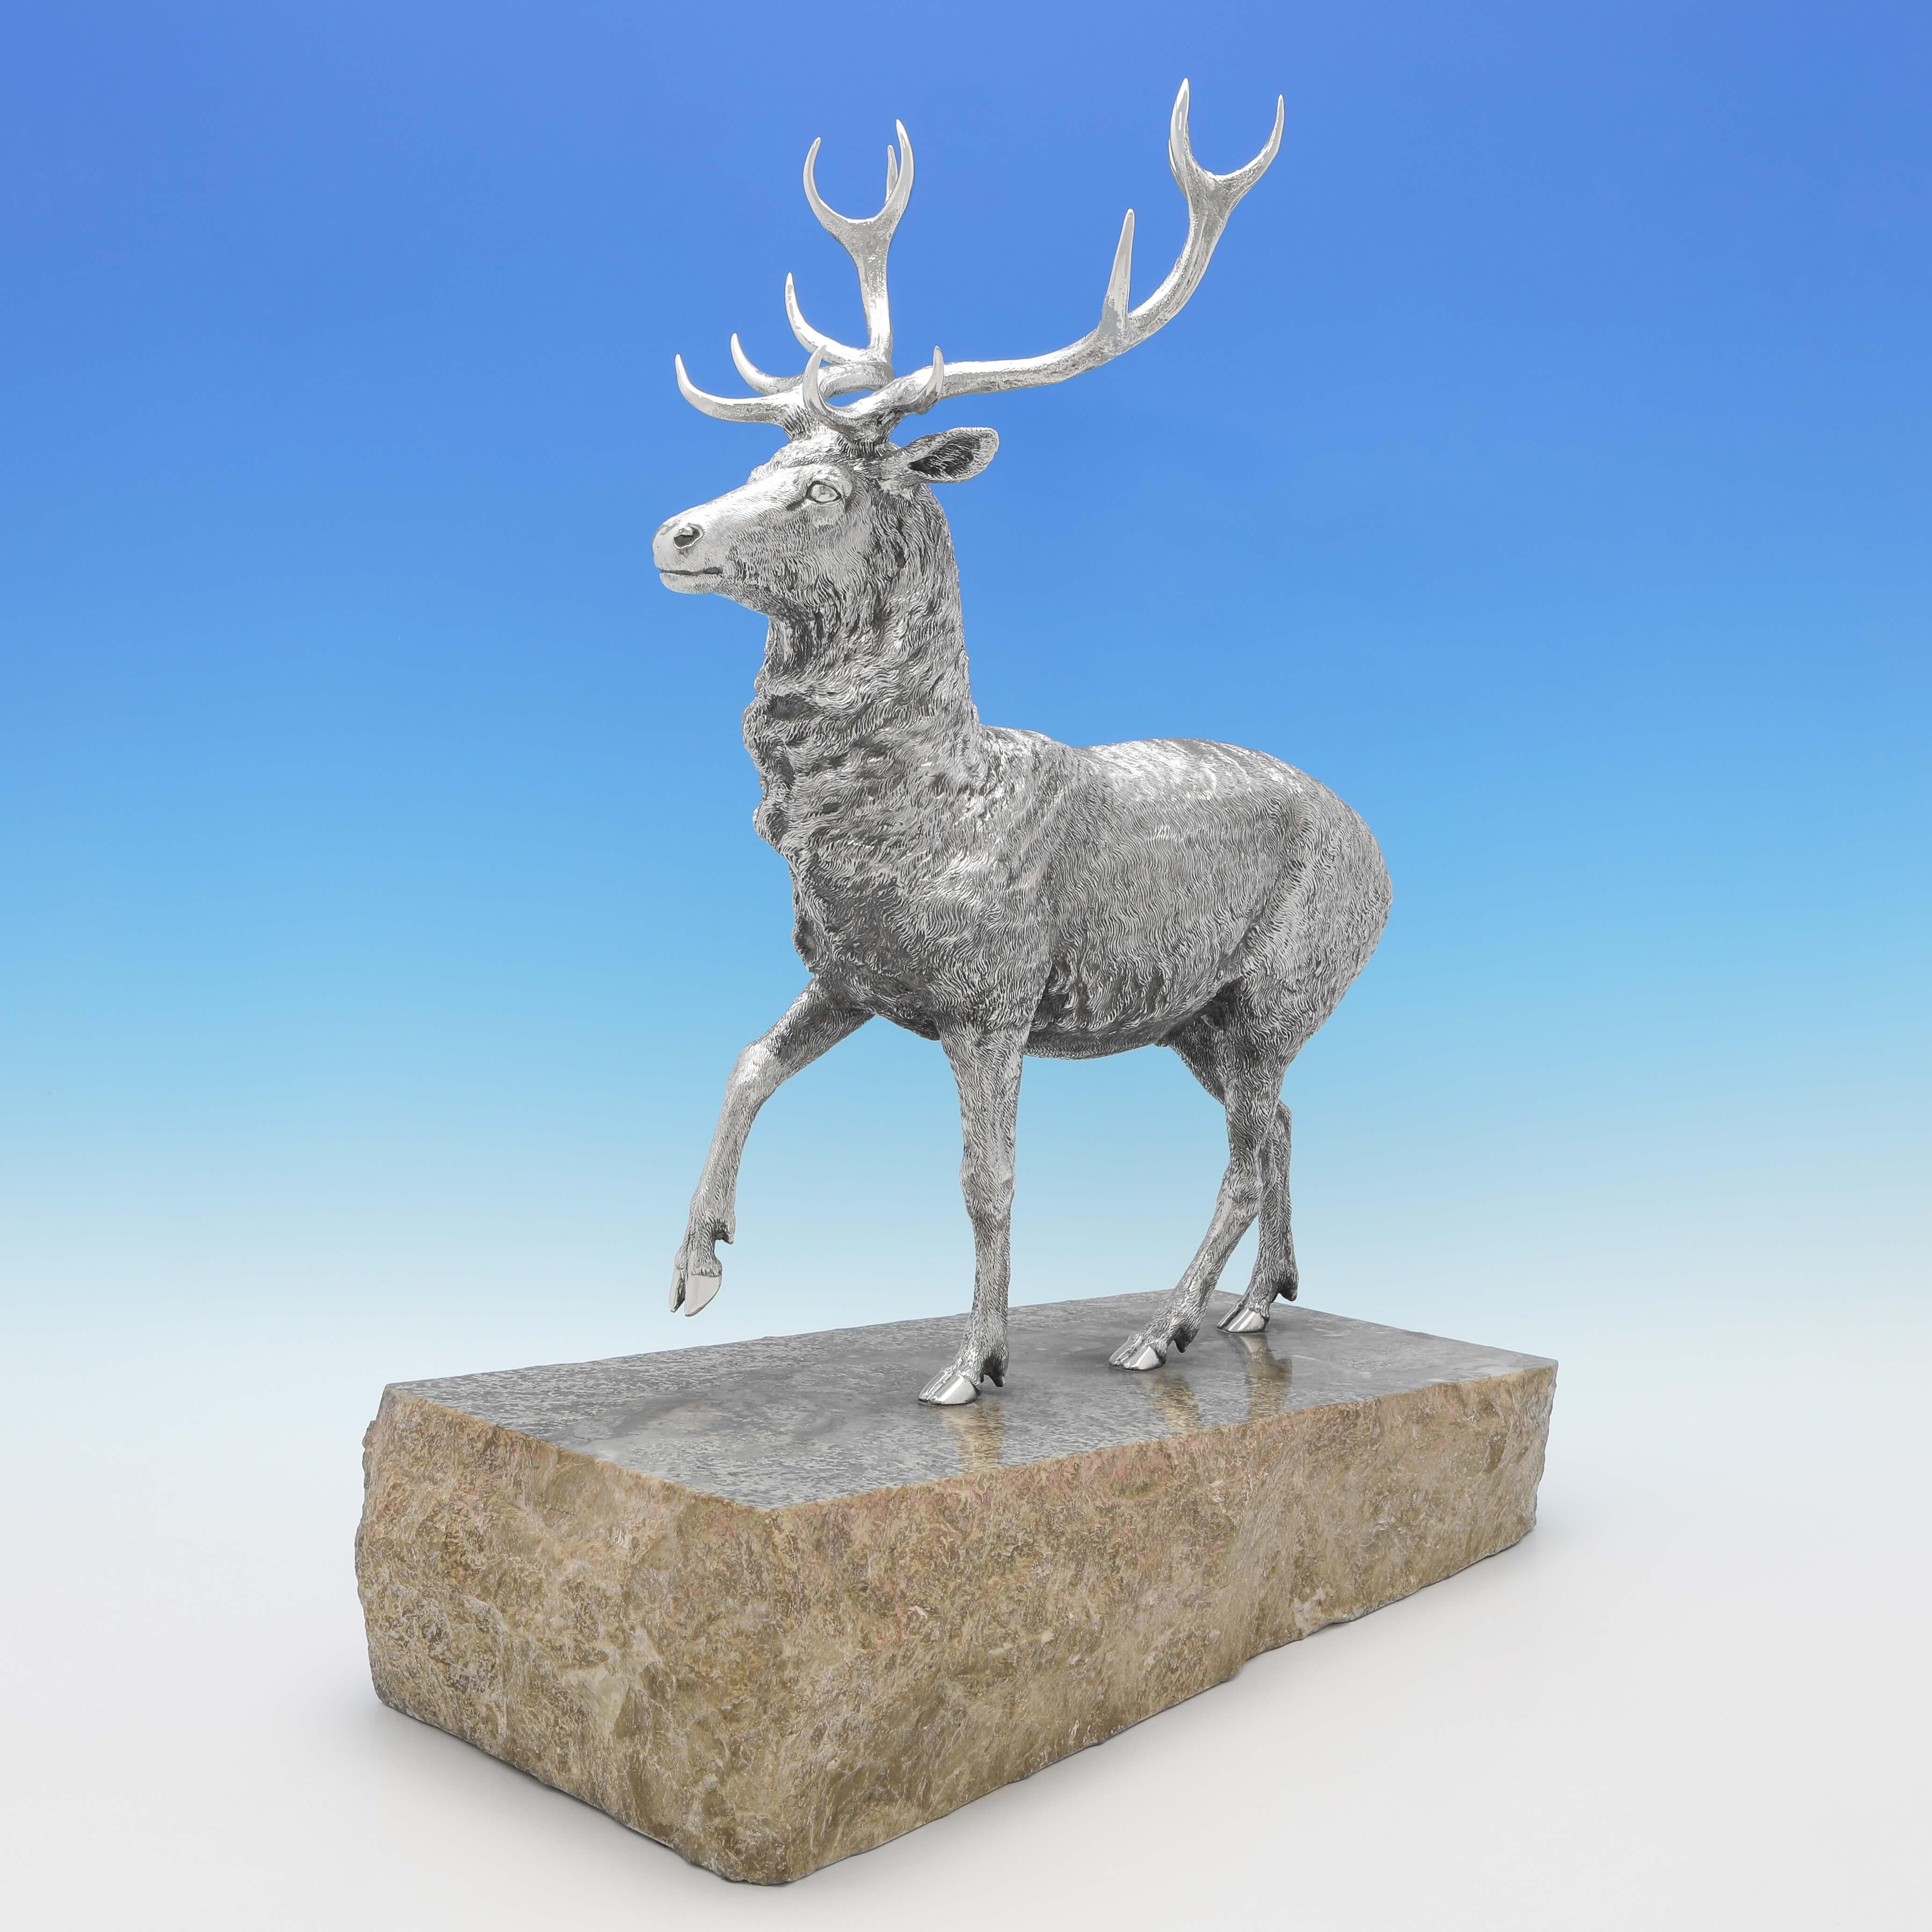 Hallmarked in London in 1976 by Garrard & Co., this stunning Elizabeth II, Sterling Silver Model of a Stag, is realistically cast and chased, and stands on a marble base. The stag model on the base measures a very impressive 21.5